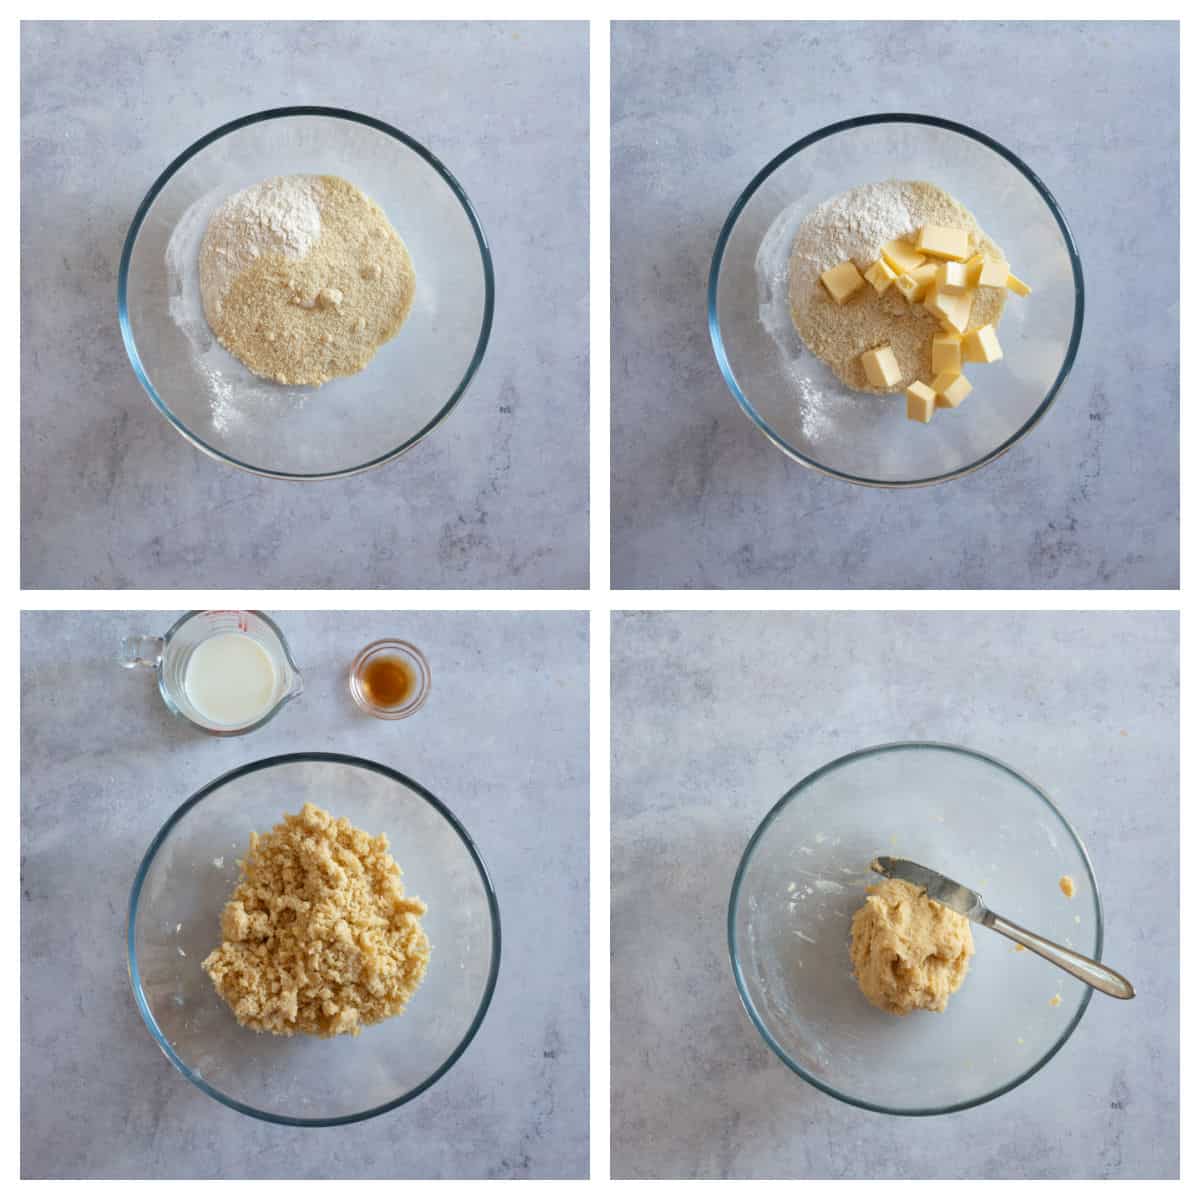 Step by step photo instructions for making cobbler dough.